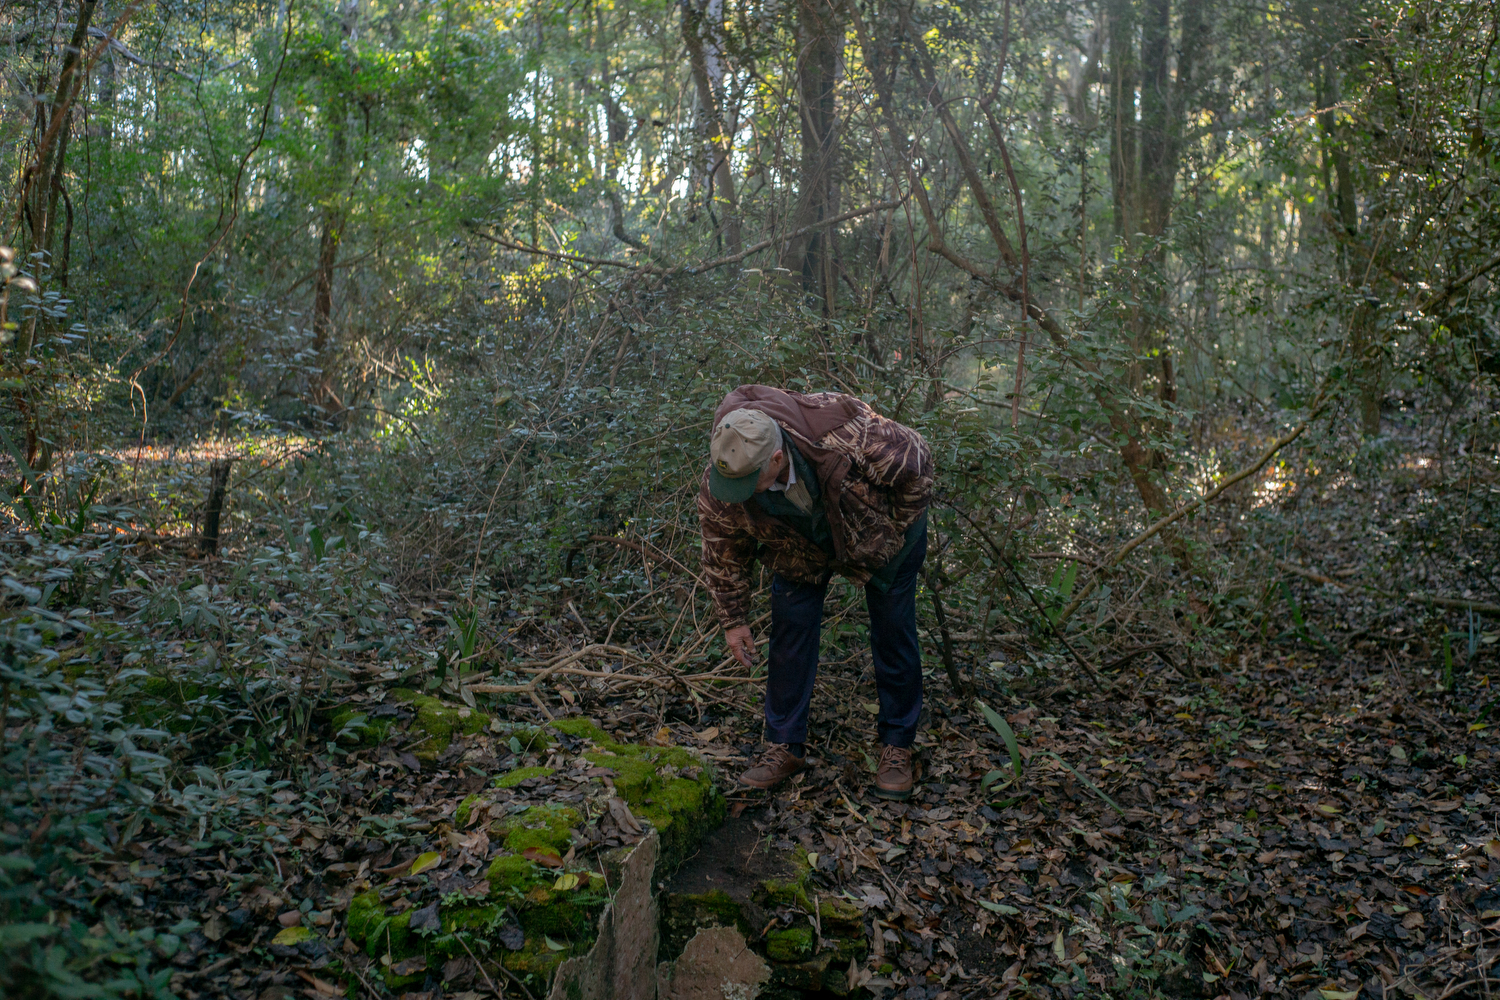 Jimmy Kerr bends down to look at a piece of the historic indigo vat ruins on his property, in Johns Island, South Carolina. Kerr played in the vat in the woods as a child, not realizing what it was.